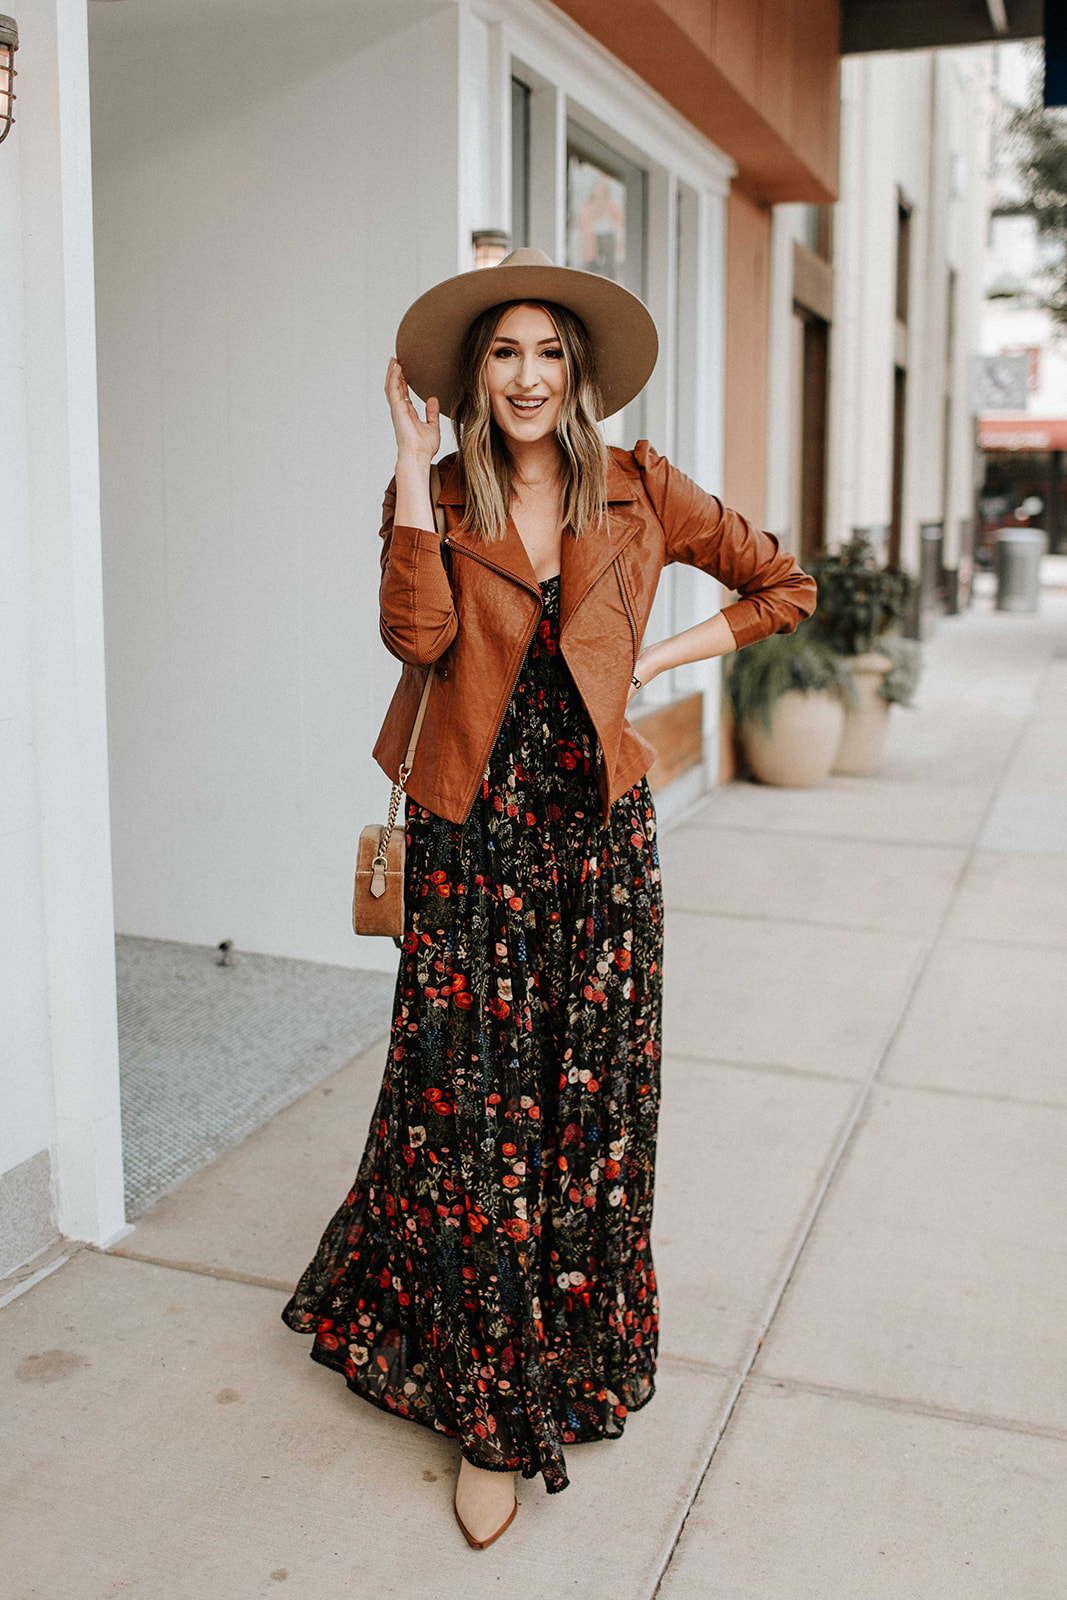 floral maxi dress, leather moto jacket, Chanel sunglasses, gold clutch -  Meagan's Moda